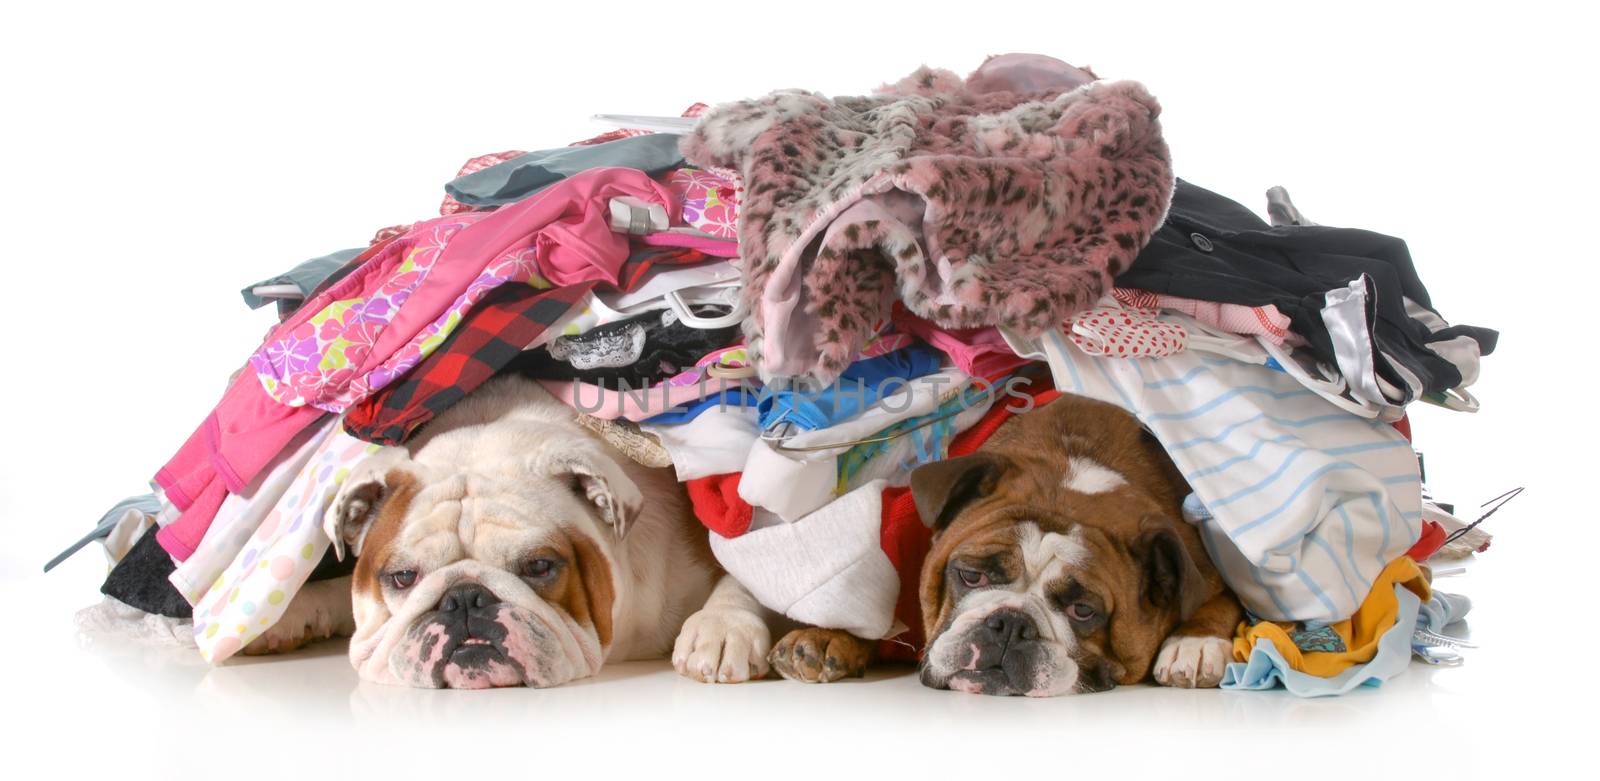 spring cleaning - two english bulldogs laying under a pile of clothes isolated on white background